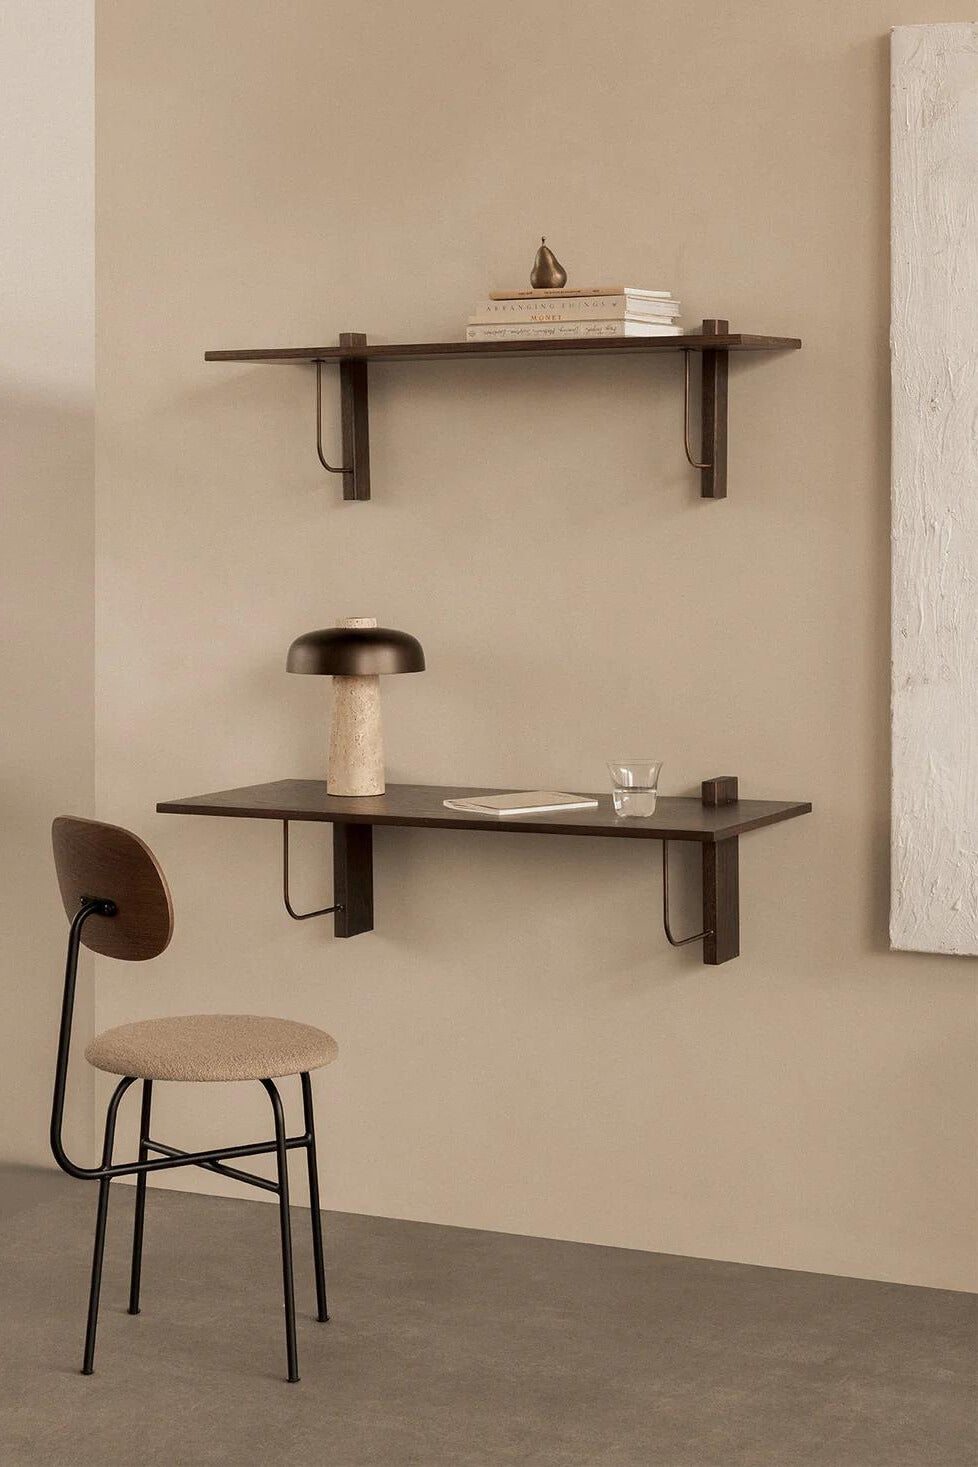 Corbel Wall Shelf and desk dark stained oak in office setting with desk chair